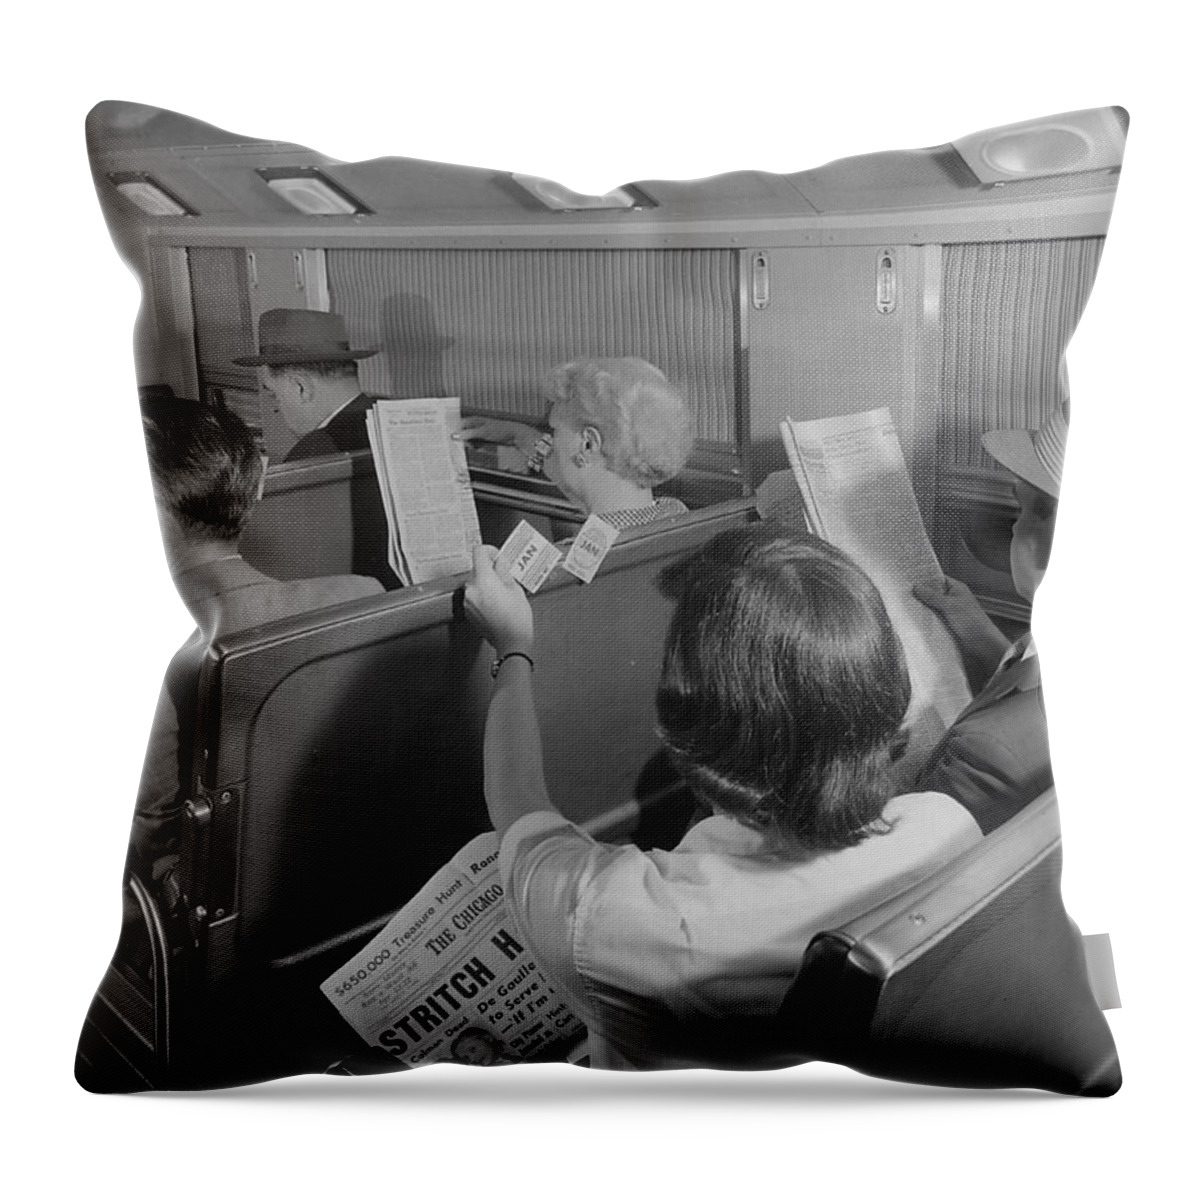 Passenger Cars Throw Pillow featuring the photograph Inside Bilevel Passenger Car - 1958 by Chicago and North Western Historical Society